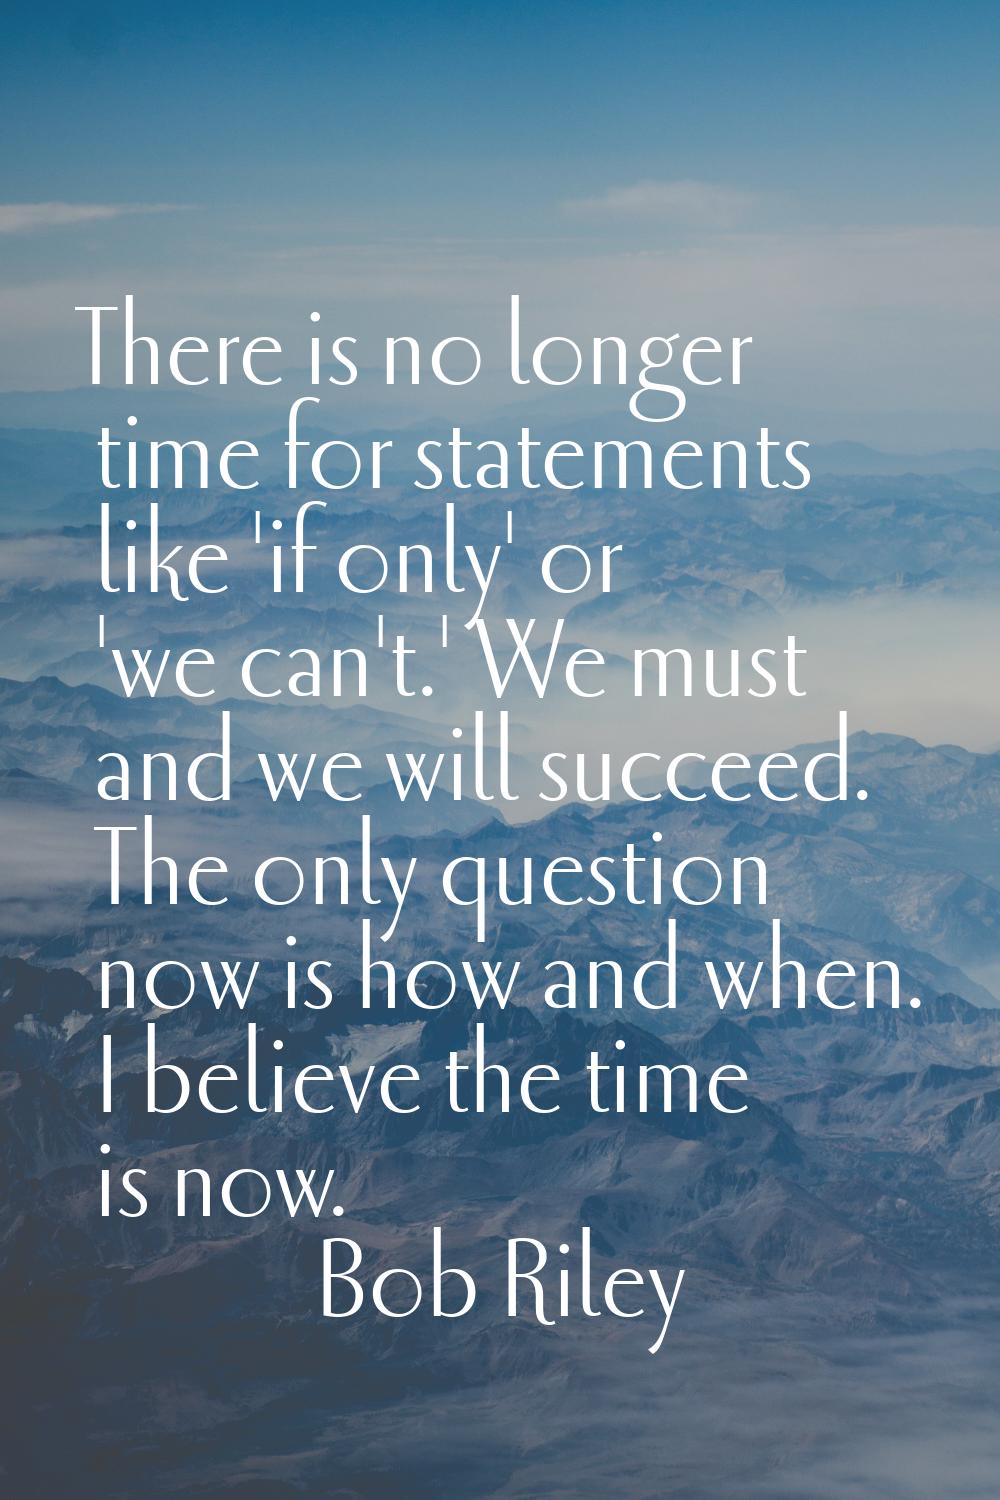 There is no longer time for statements like 'if only' or 'we can't.' We must and we will succeed. T